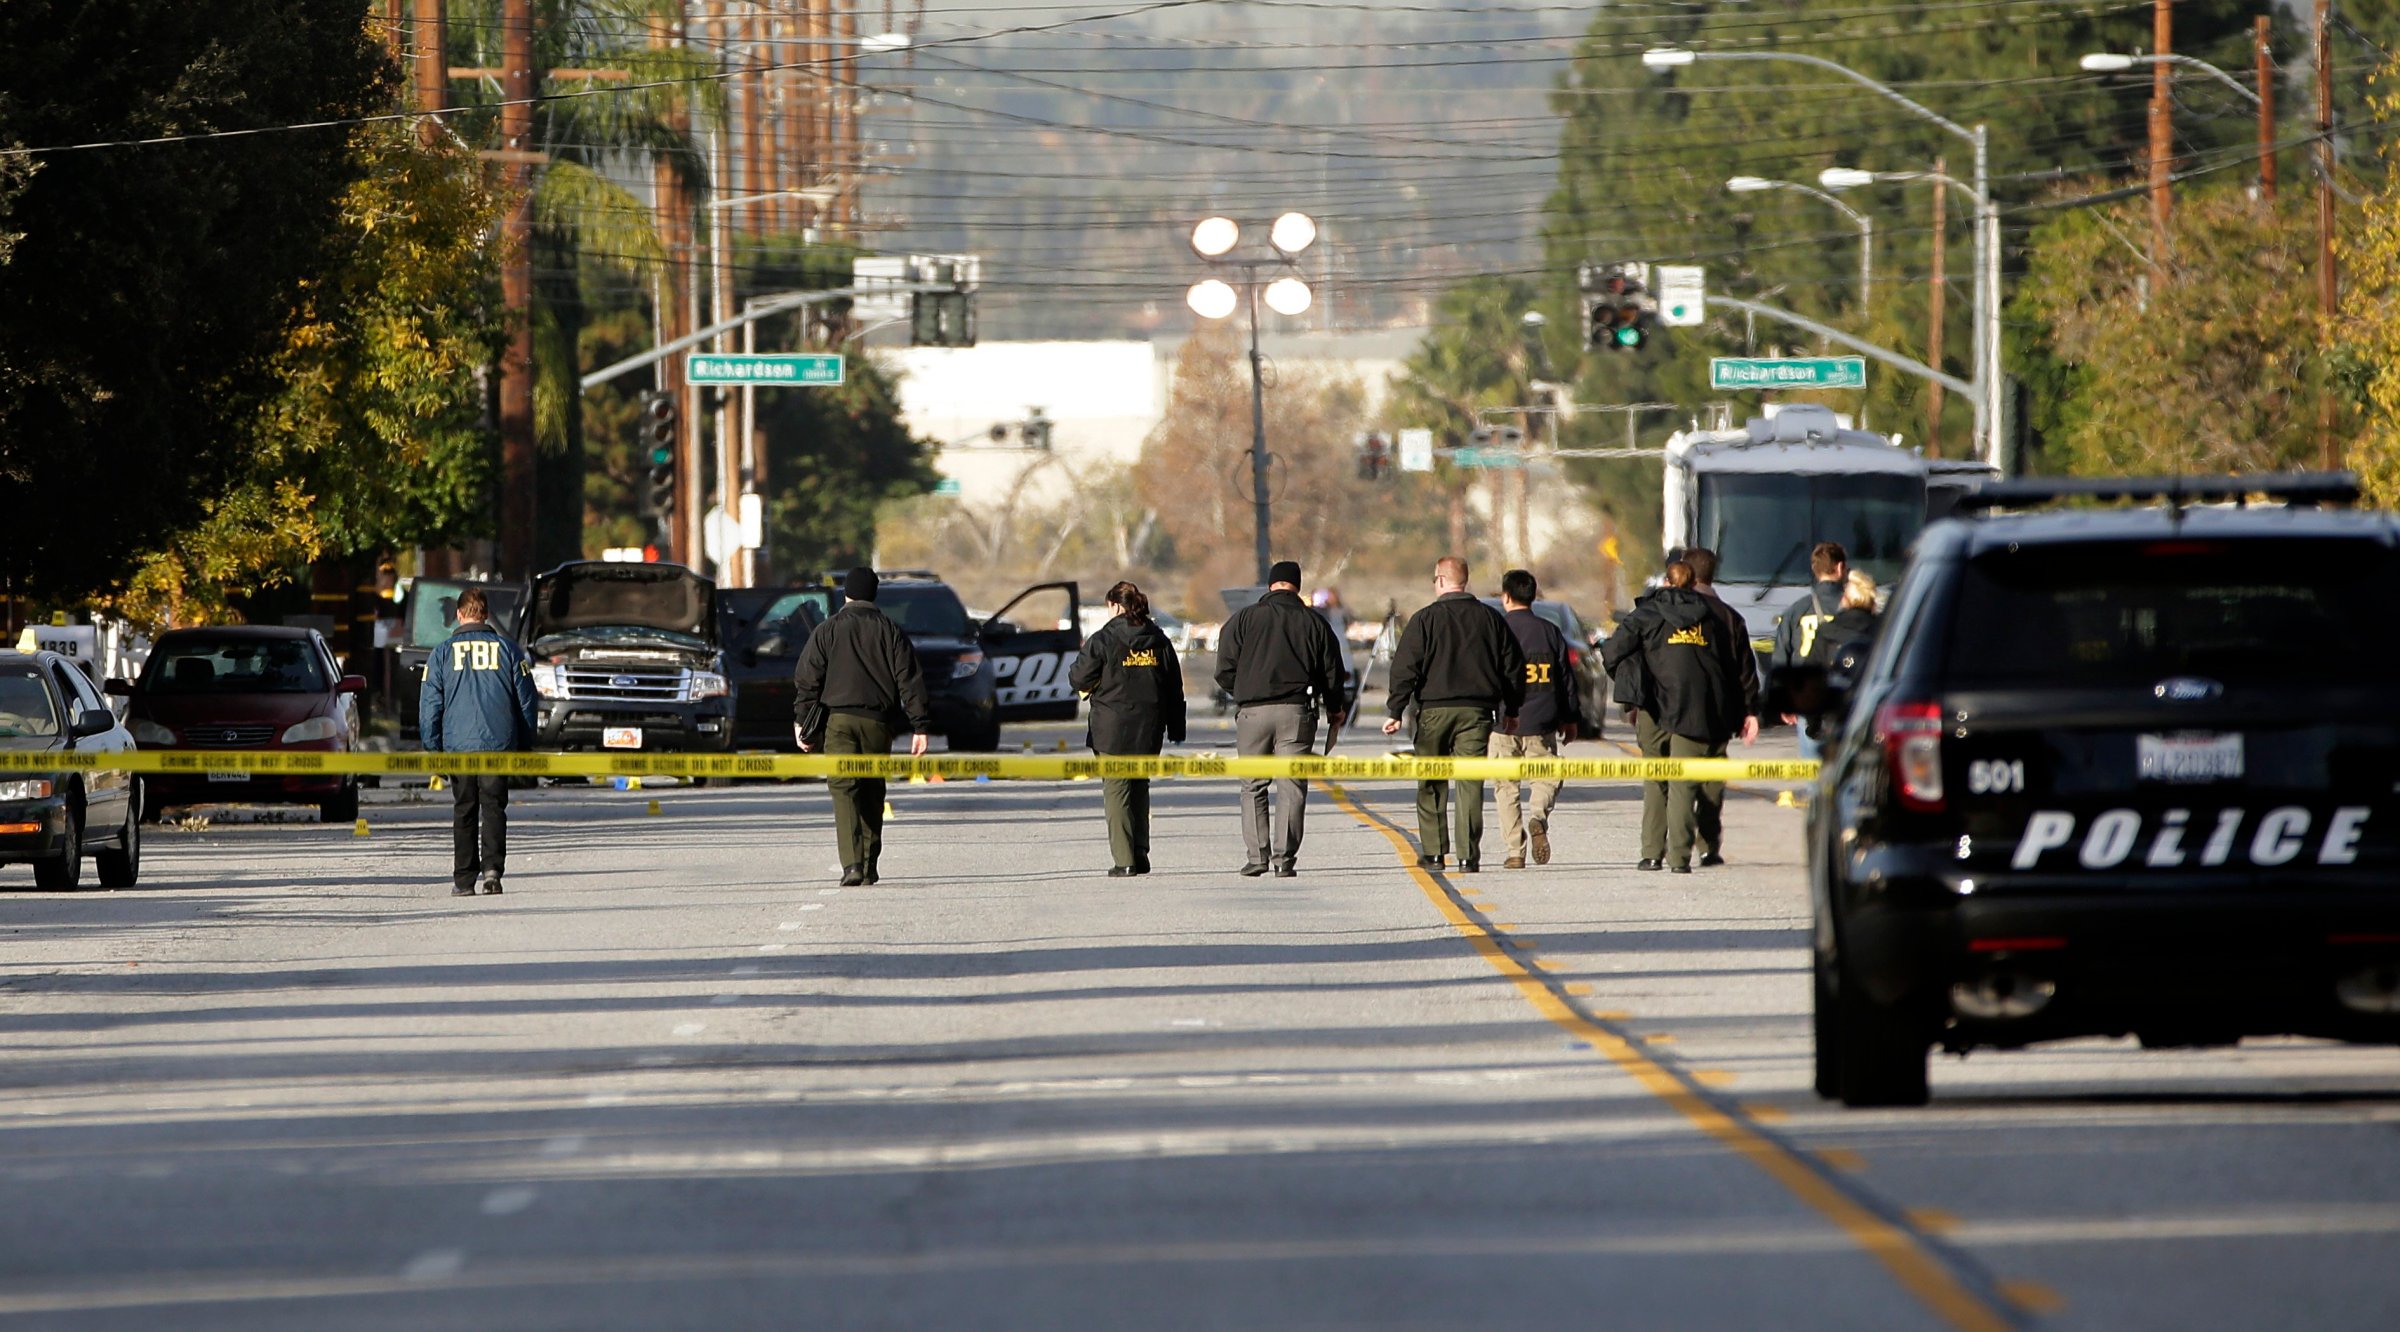 Investigators search for bullet casings at the scene where Wednesday's police shootout with suspects took place in San Bernardino, Calif on Dec. 3, 2015.